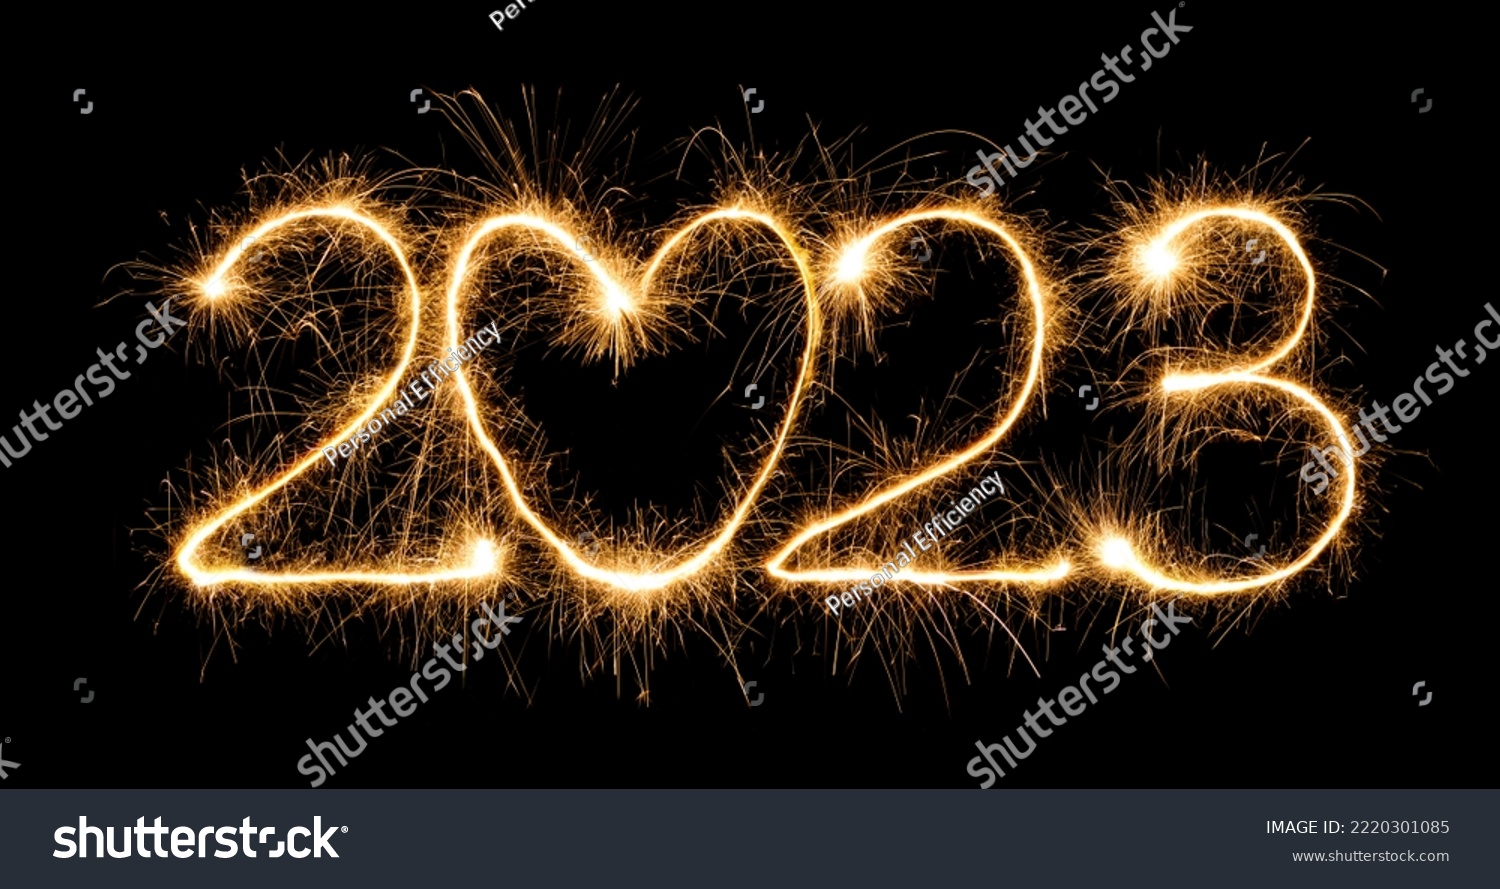 Sparkling burning creative numeral 2023 with heart isolated on black background. Design element for New Year 2023. Beautiful Template for design greeting card, holiday flyer, billboard or Web banner #2220301085